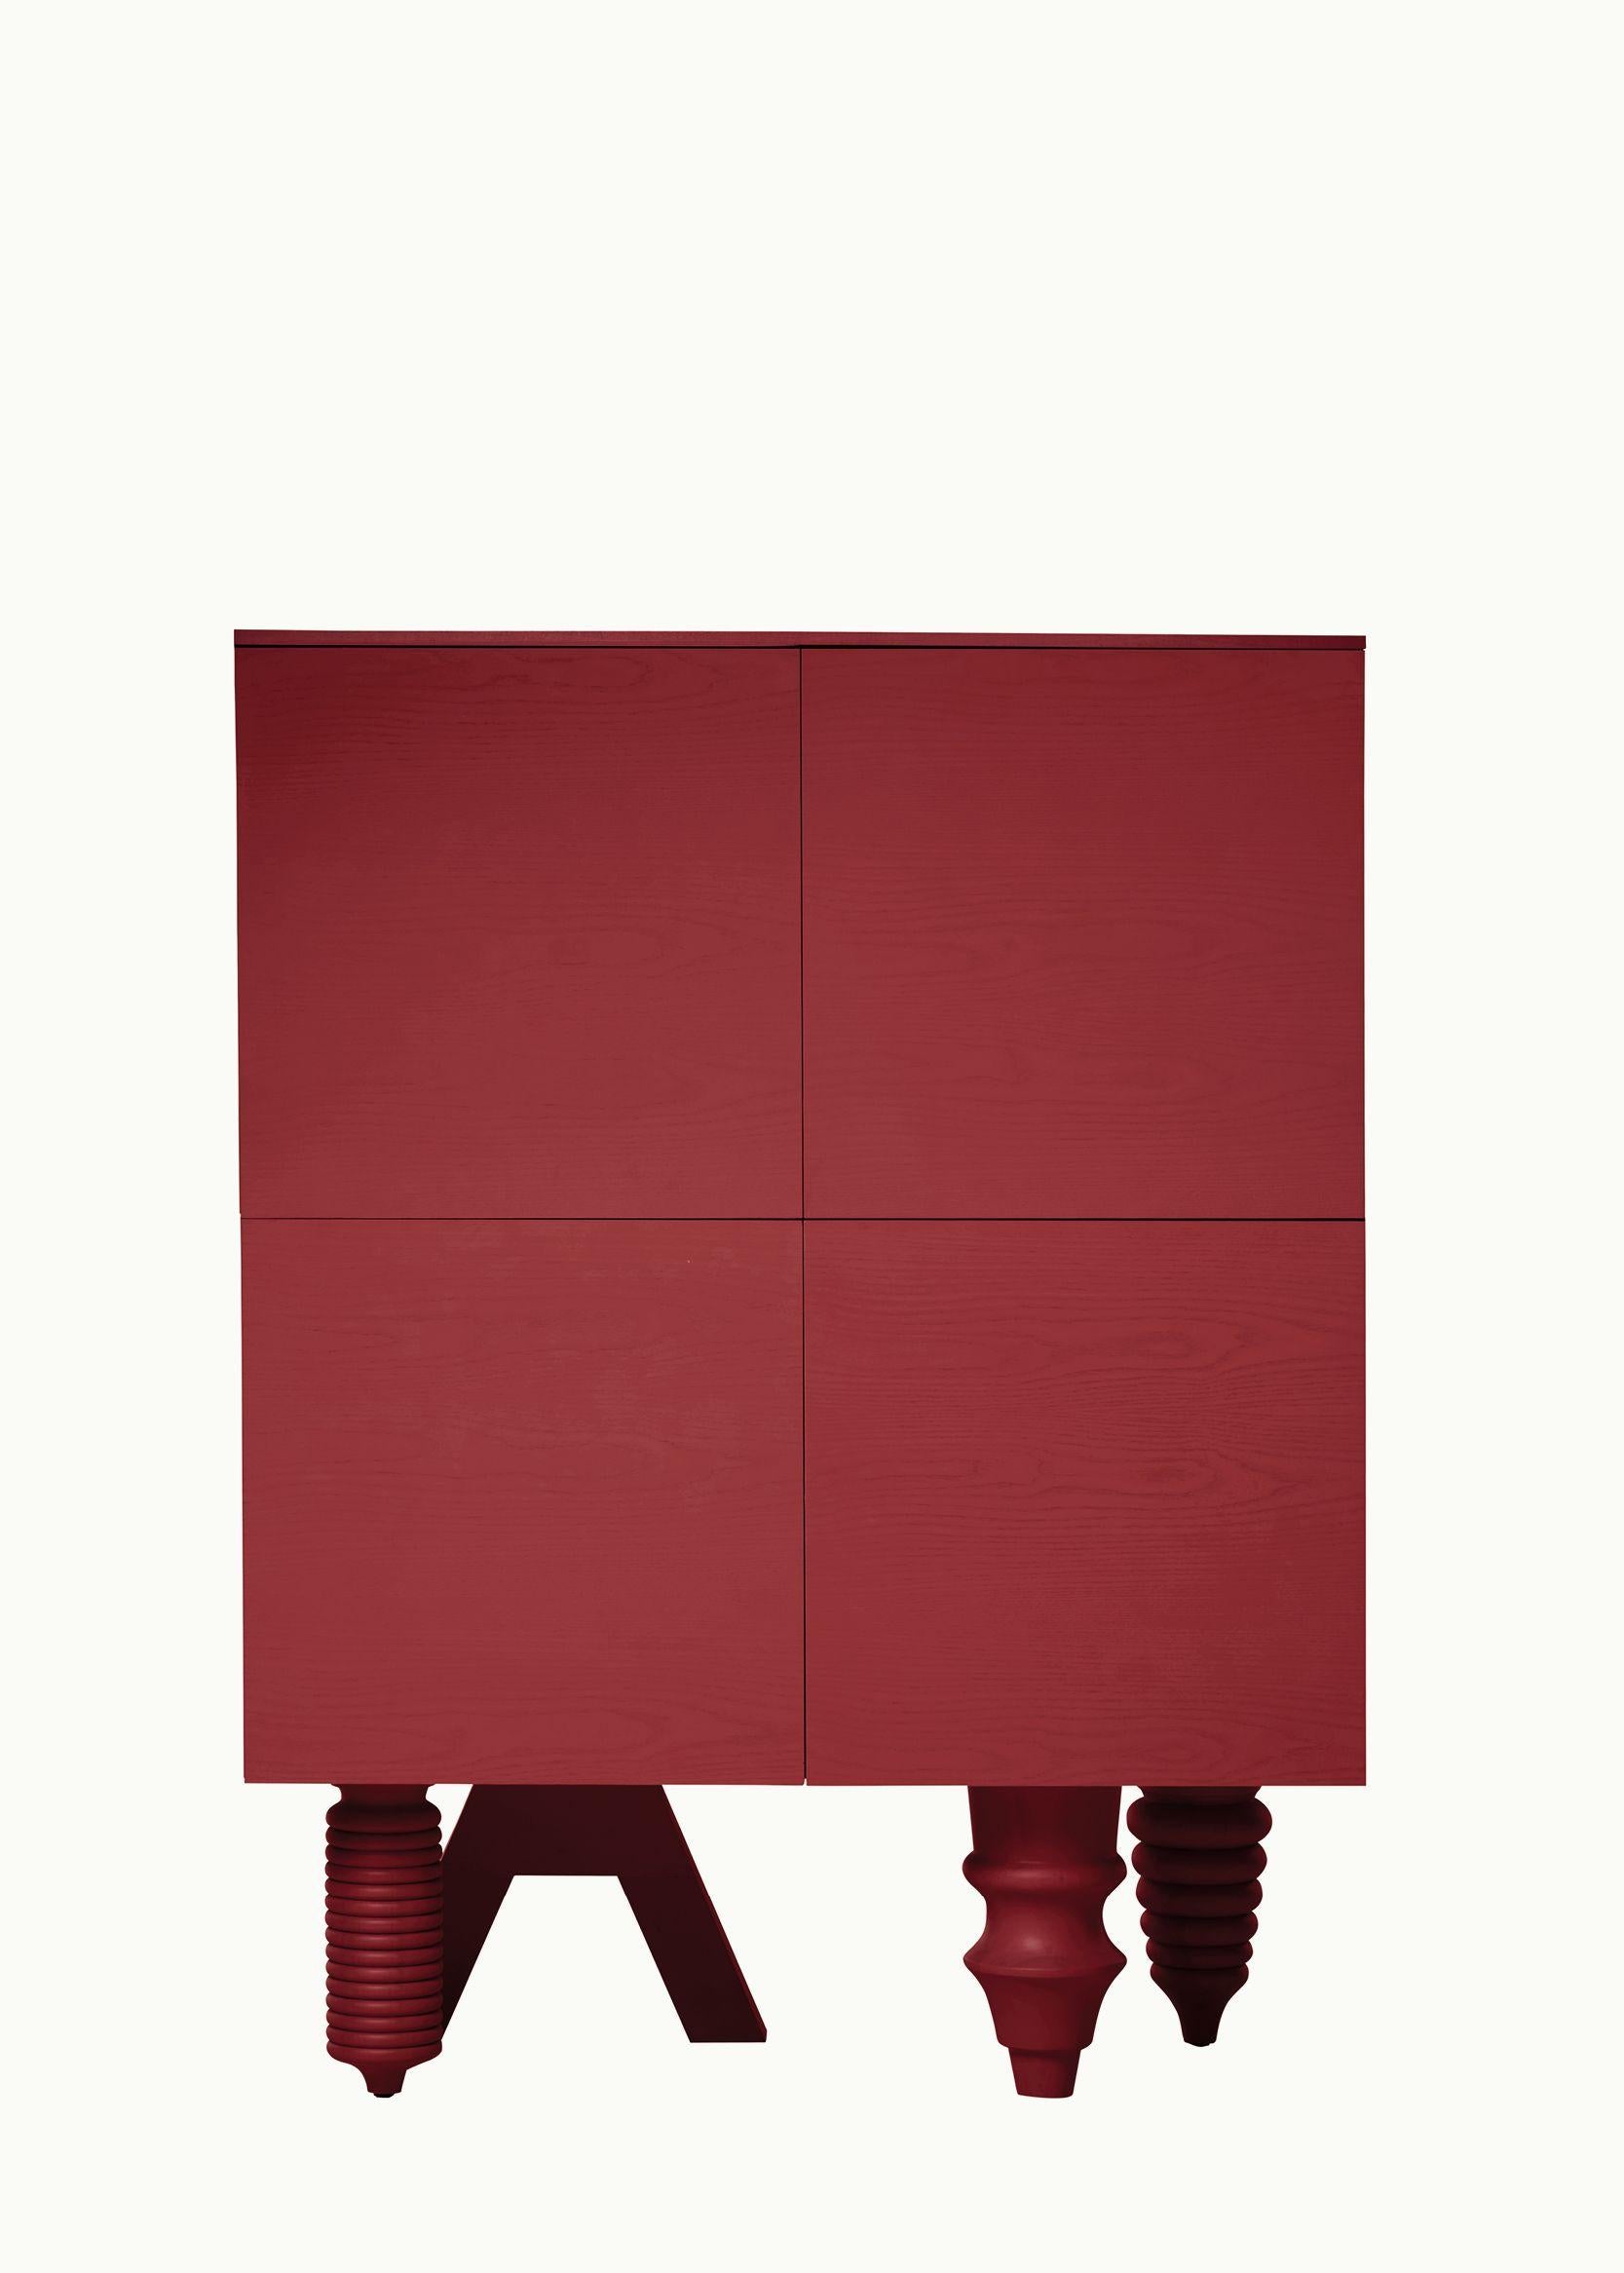 Multileg Cabinet in Red Ash by Jaime Hayon for BD Barcelona

It can be uniquely configured with twelve elaborate leg options, customisable finishes and colours, and a multitude of interior storage variations. The Multileg is disciplined and